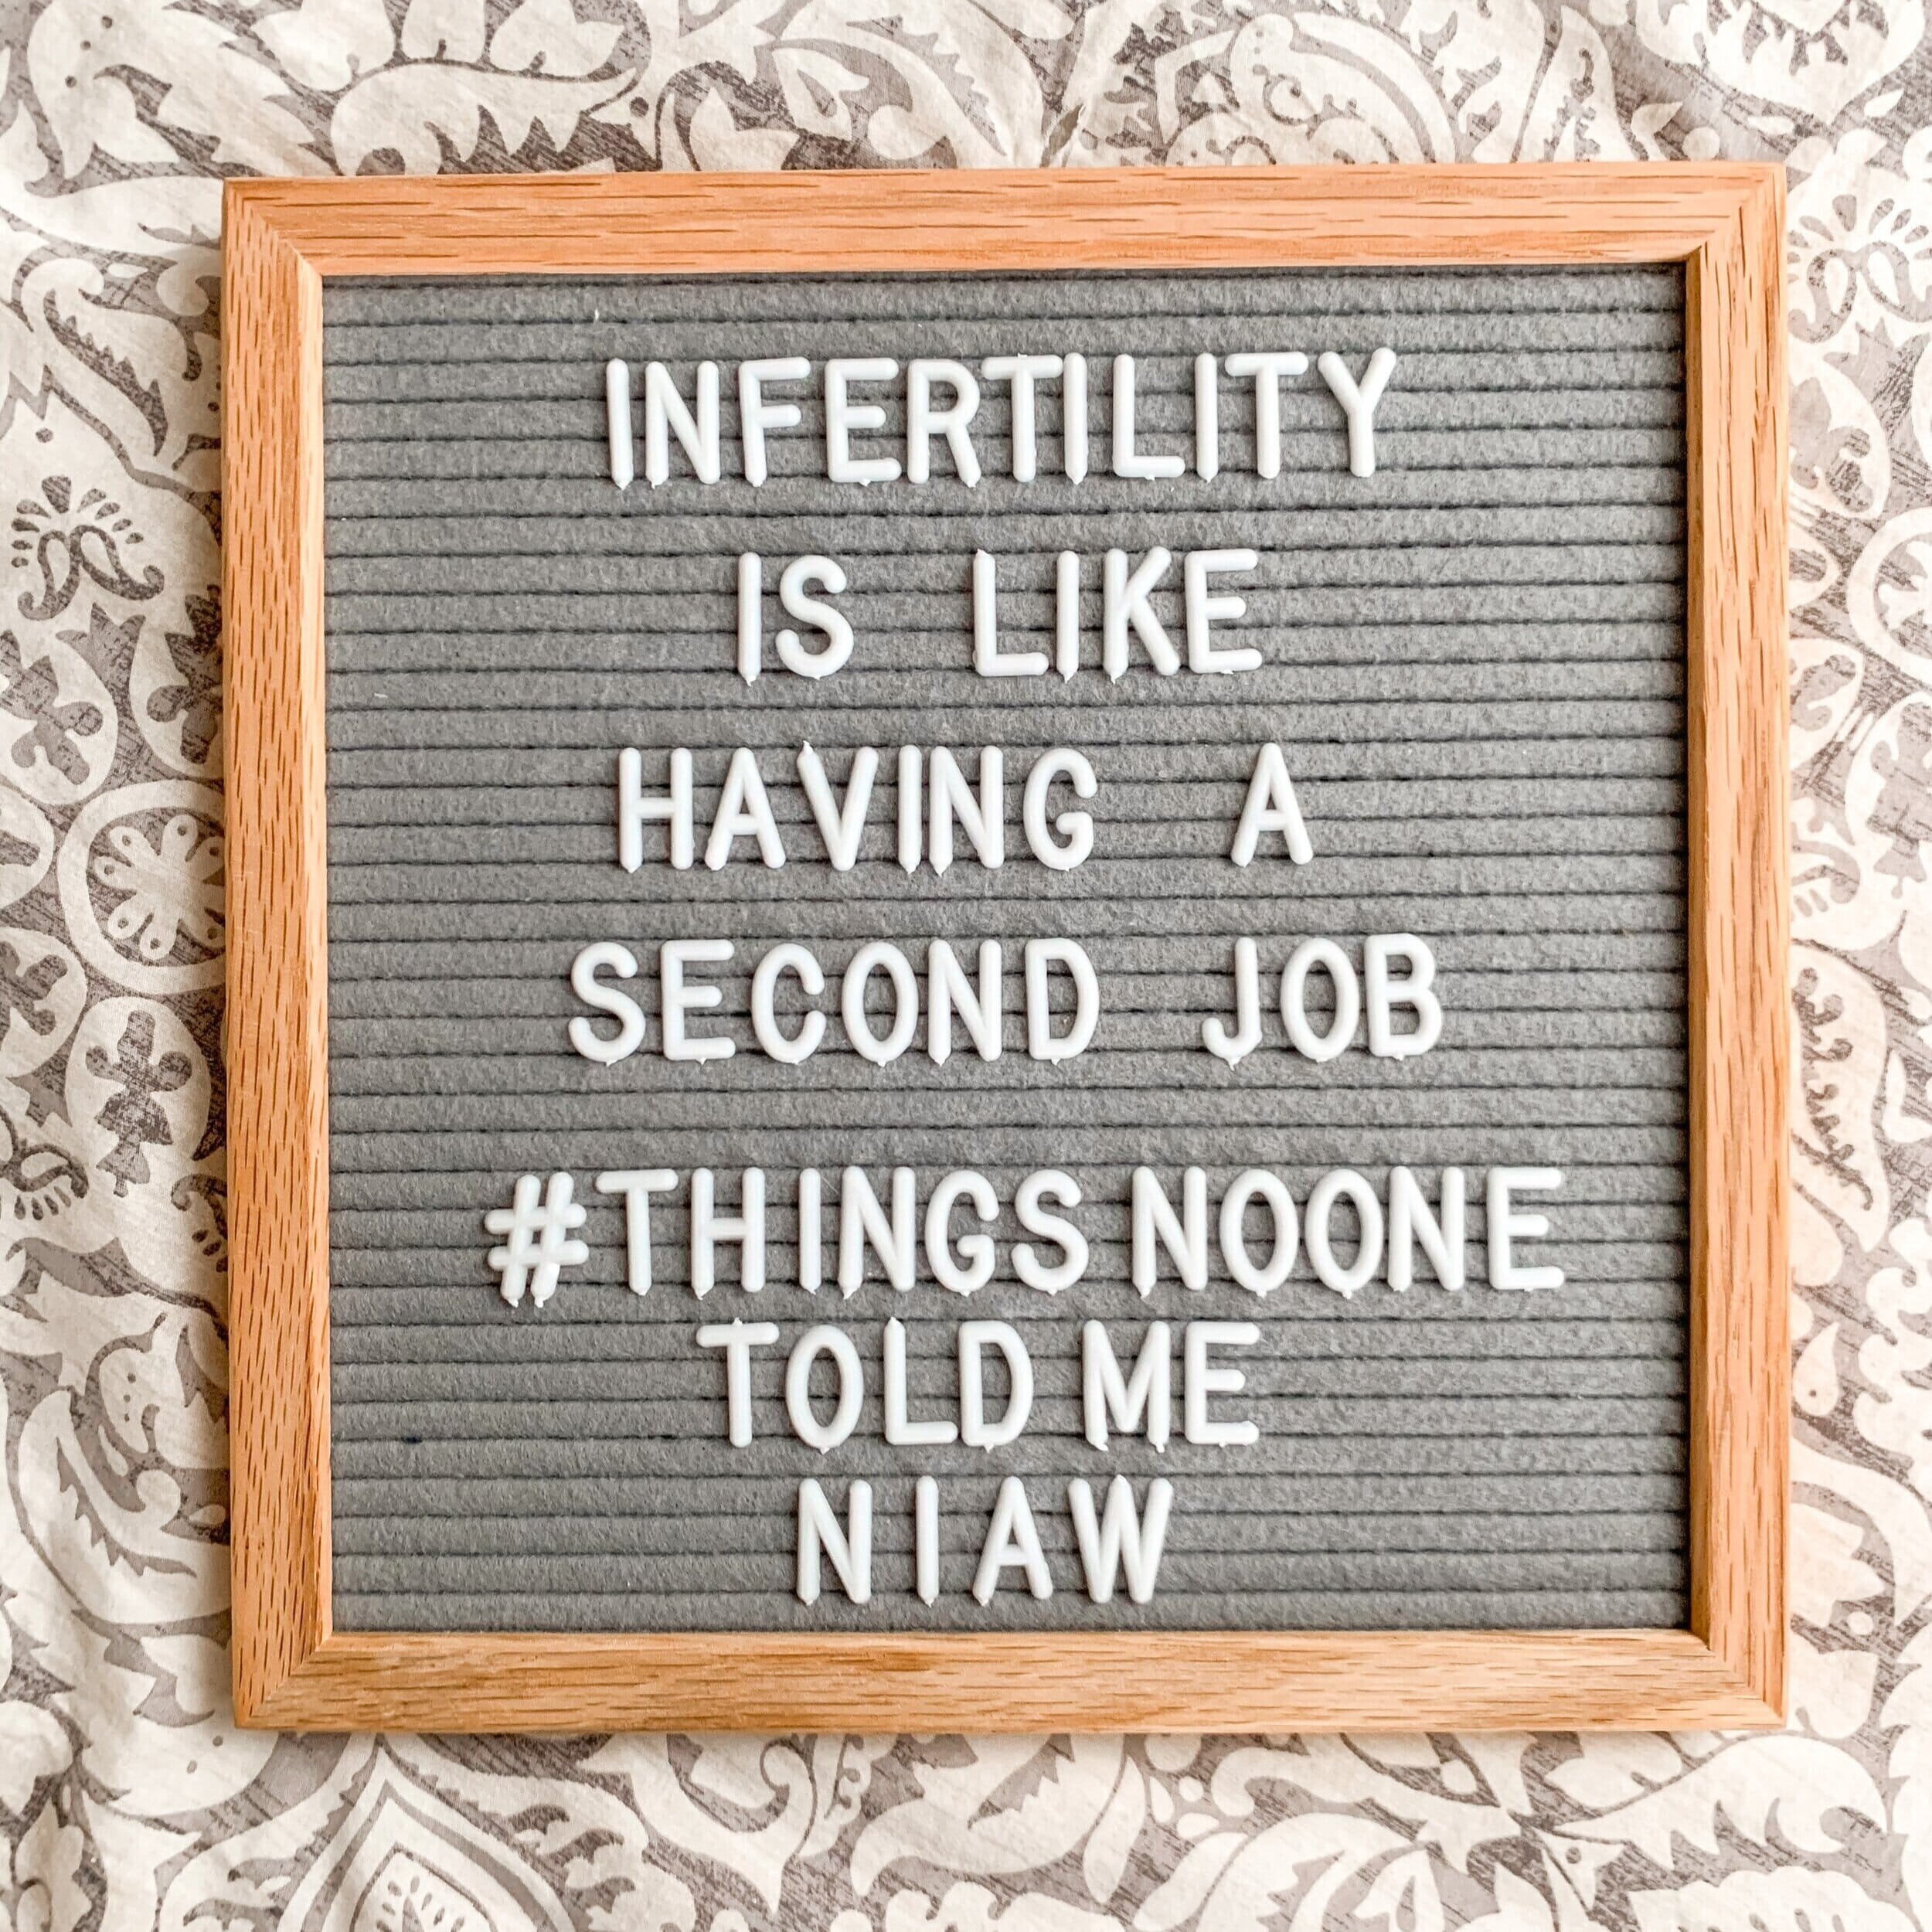 sign that reads "infertility is like having a second job"